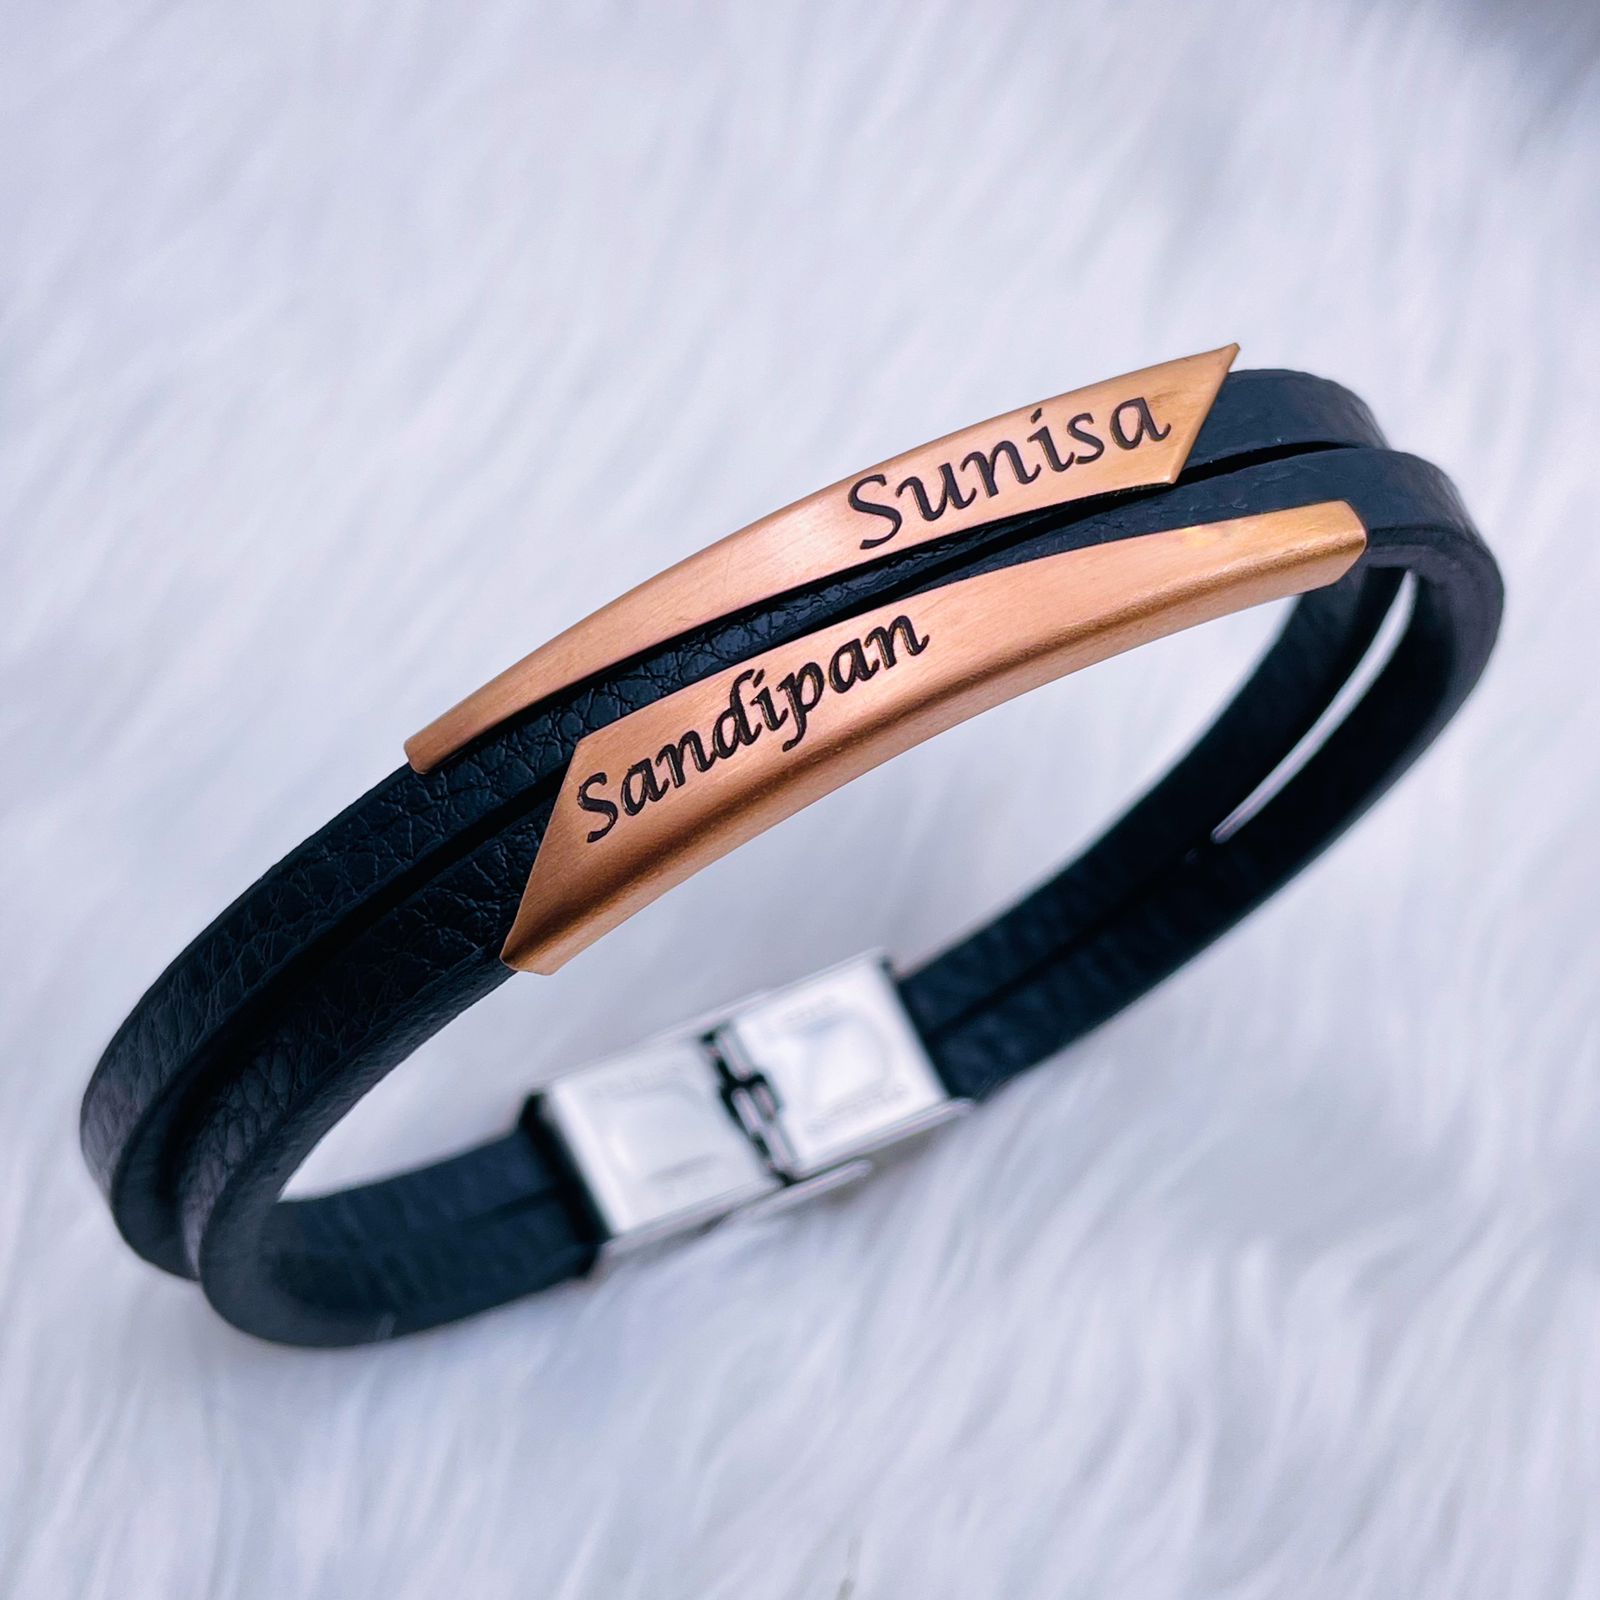 Kierbets Designs  Unique and beautiful leather bracelet designs for both  of you These great unisex gift ideas look fabulous in the office or at  play Get yours today httpswwwkierbetscomlisting746642023layered leathersilveramorbracelet 